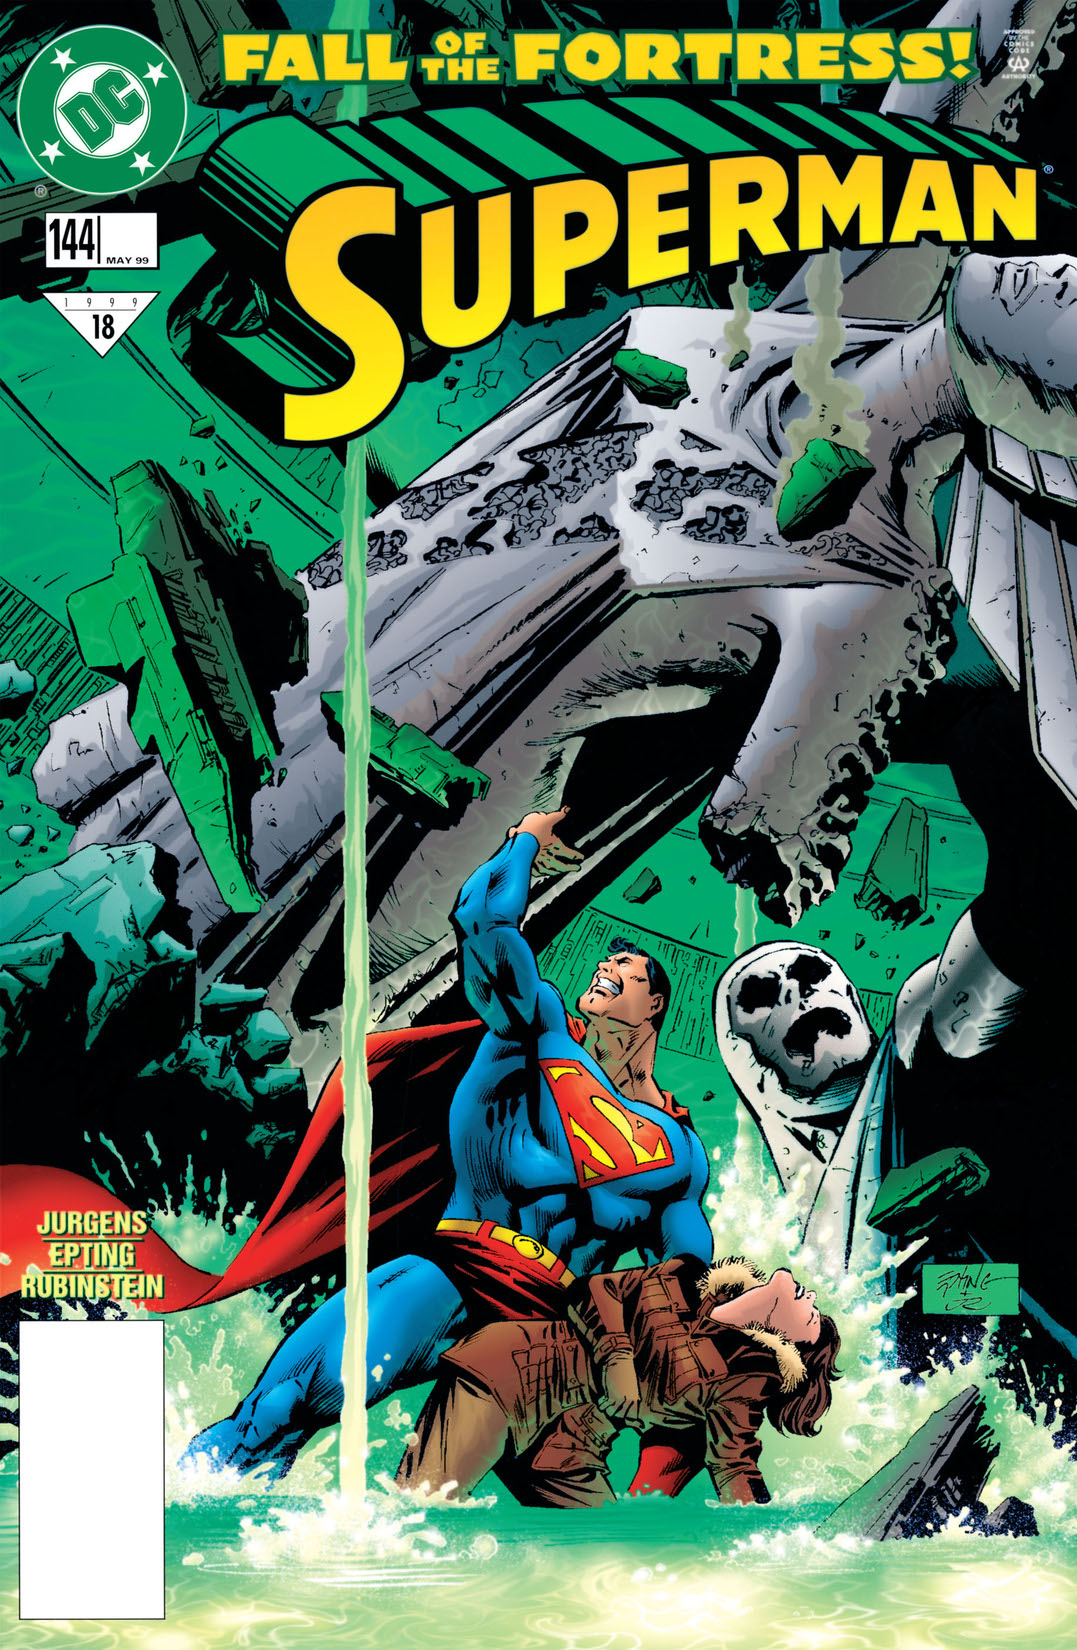 Superman (1986-2006) #144 preview images